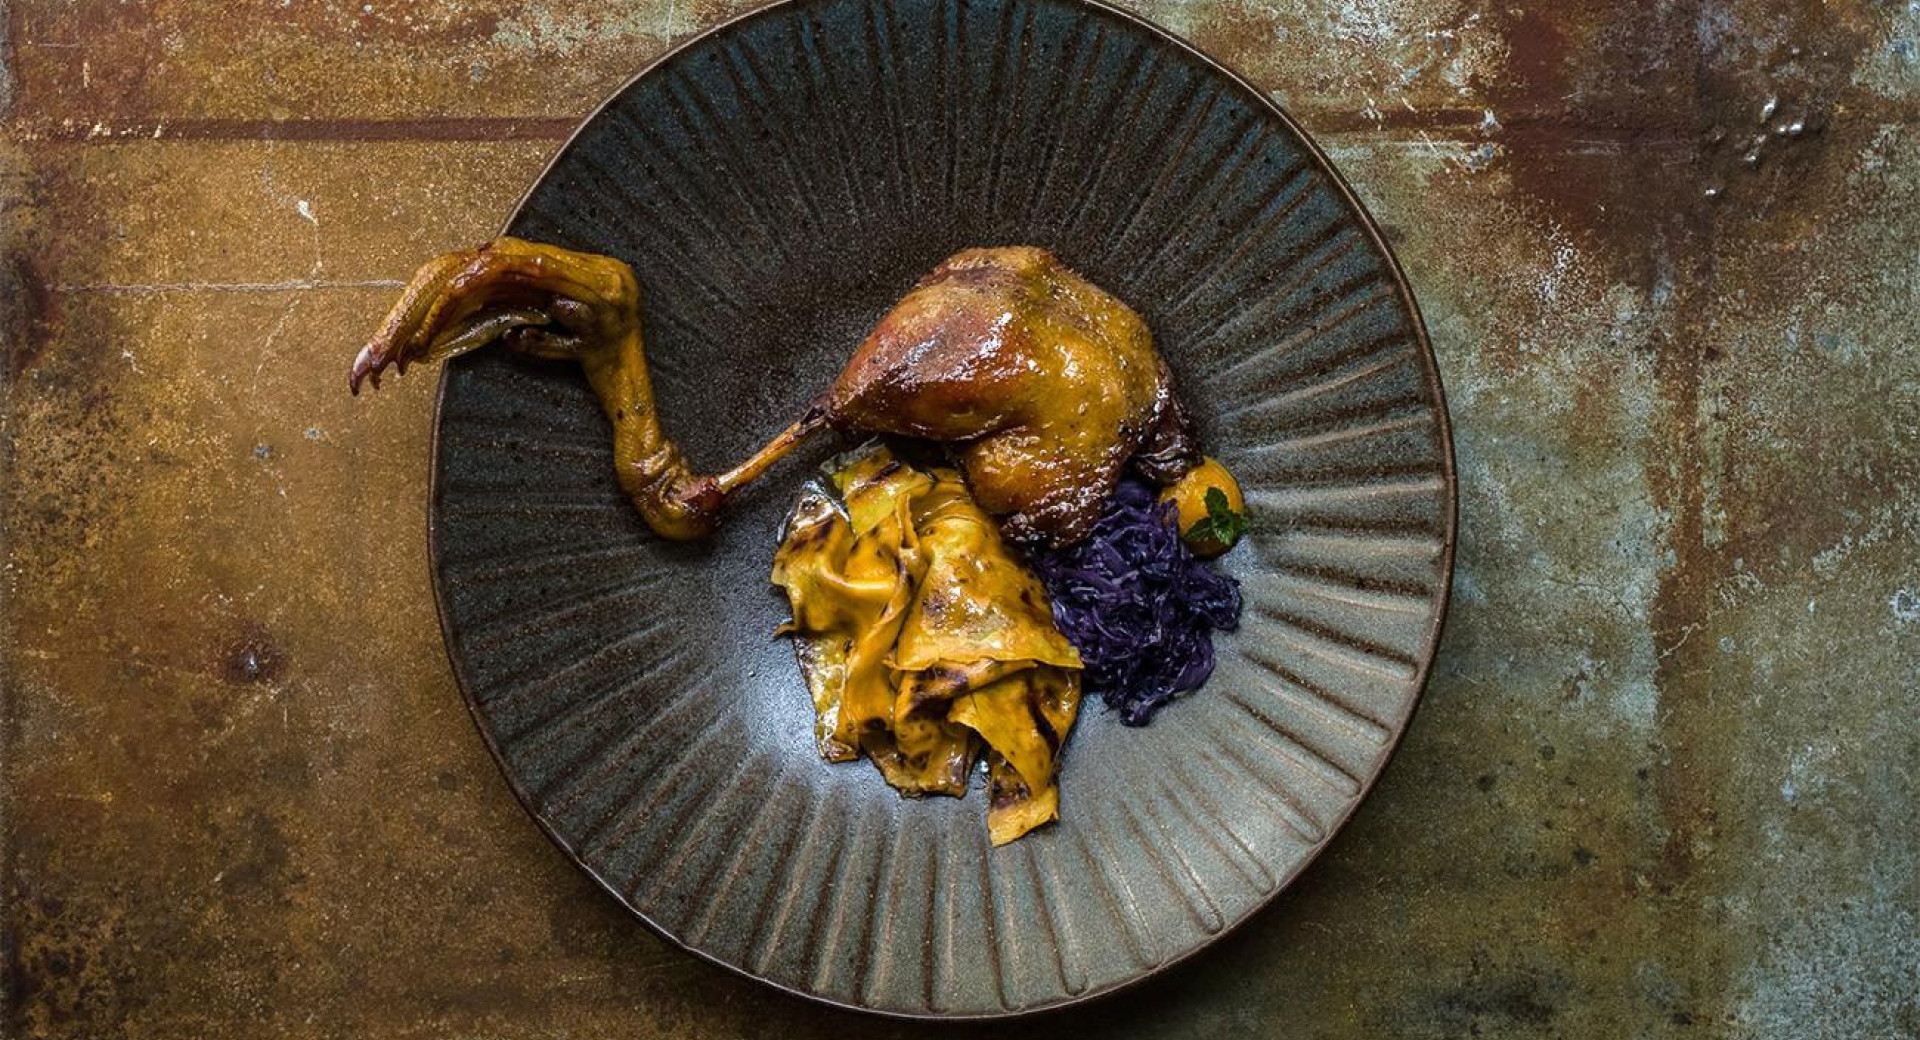 Duck leg placed over a dark plate. Next to it, there are pasta squares (known as mlinci) and red cabbage. The plate is on a brown, rustic base.